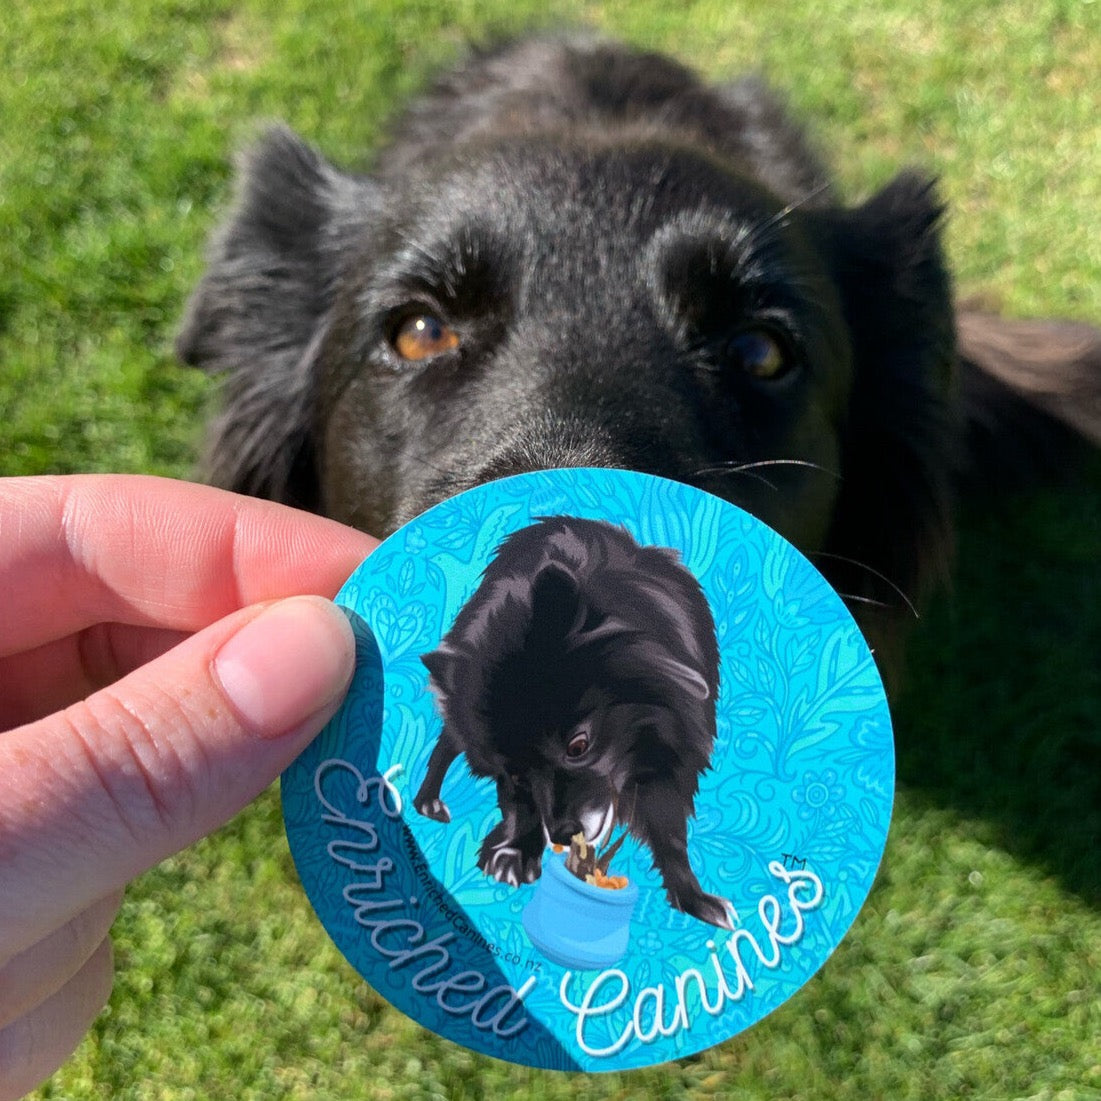 Enriched Canines Magnets